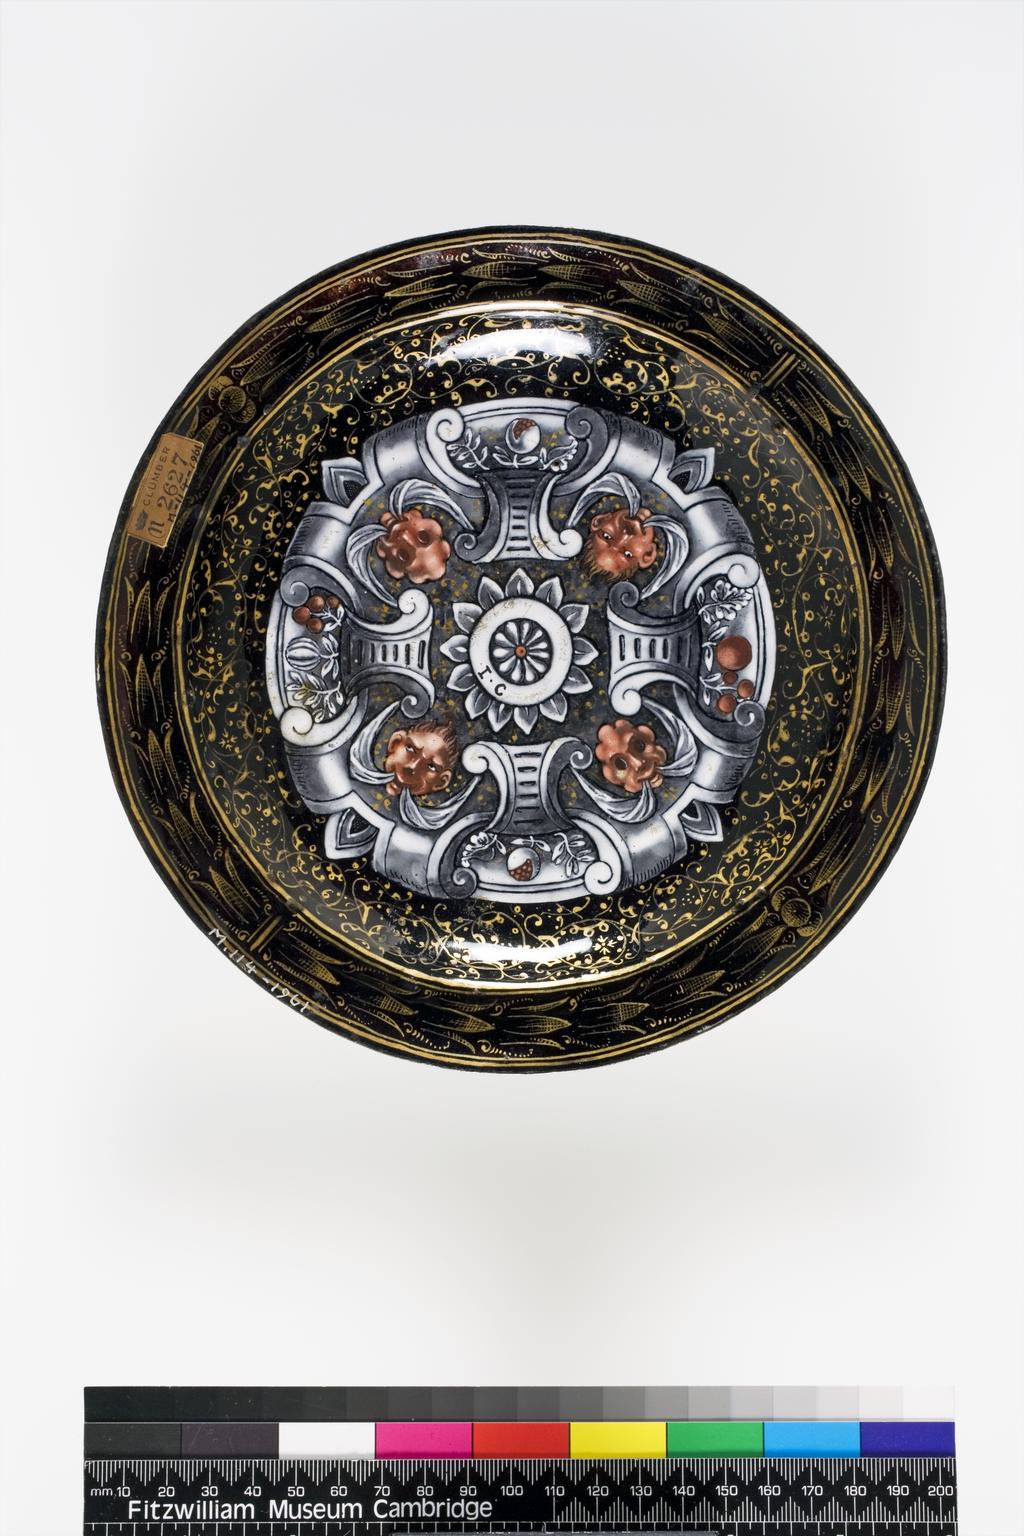 An image of Limoges Enamel Plate. Court dit Vigier, Jean I (French, d. 1592). Court dit Vigier, Jean II (French, c.1575 to beween 1631-1635). The Egyptians adoring Joseph in Pharaoh's Chariot or The Triumph of Joseph. Circular with slightly raised edge, narrow rim, and shallow well with curved sides. Copper, enamelled in polychrome and grisaille, and gilded. Height, whole, 2.2 cm, diameter, whole, 19.9 cm, circa 1564-1610. Limoges, France.